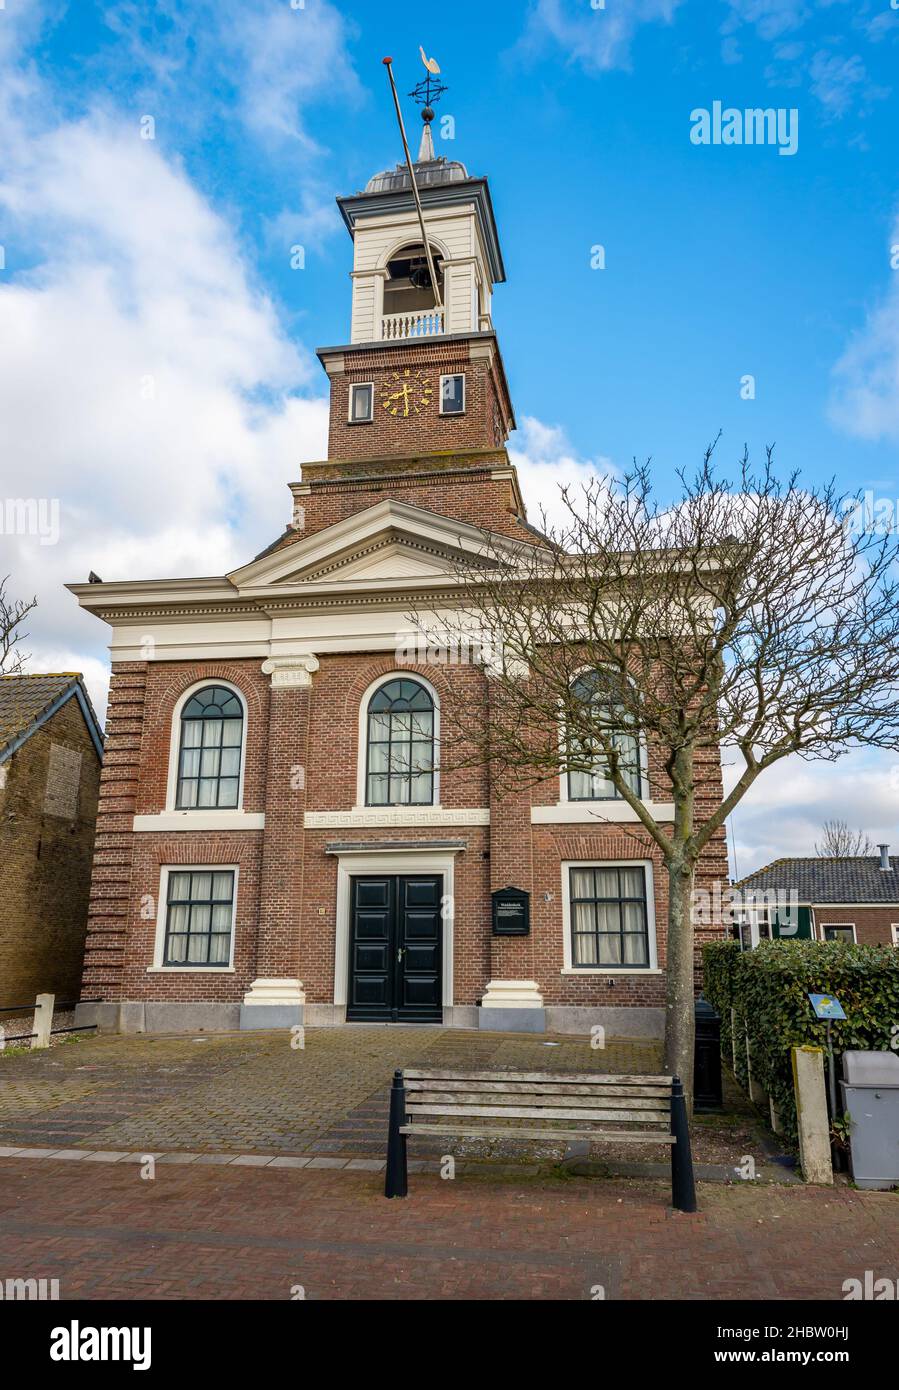 Protestant church from 1841 in the Cocksdorp village on the island of Texel, The Netherlands Stock Photo